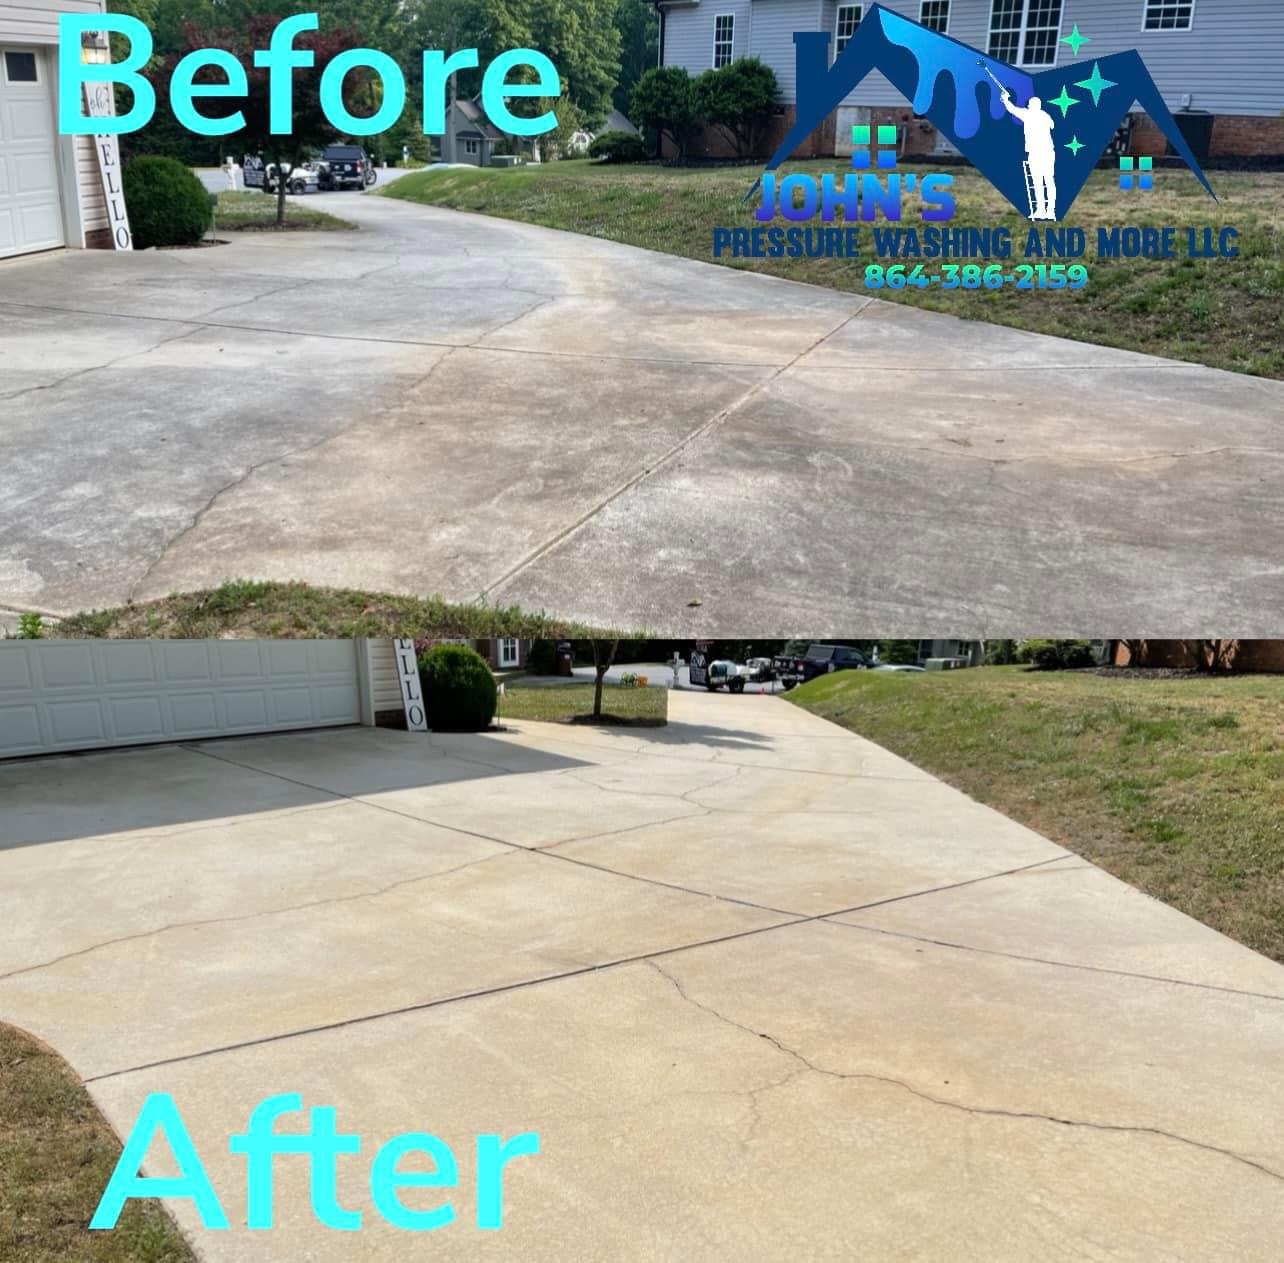 House Wash, Roof Wash, Gutter Cleaning, Gutter Brightening, & Driveway Cleaning in Easley, SC